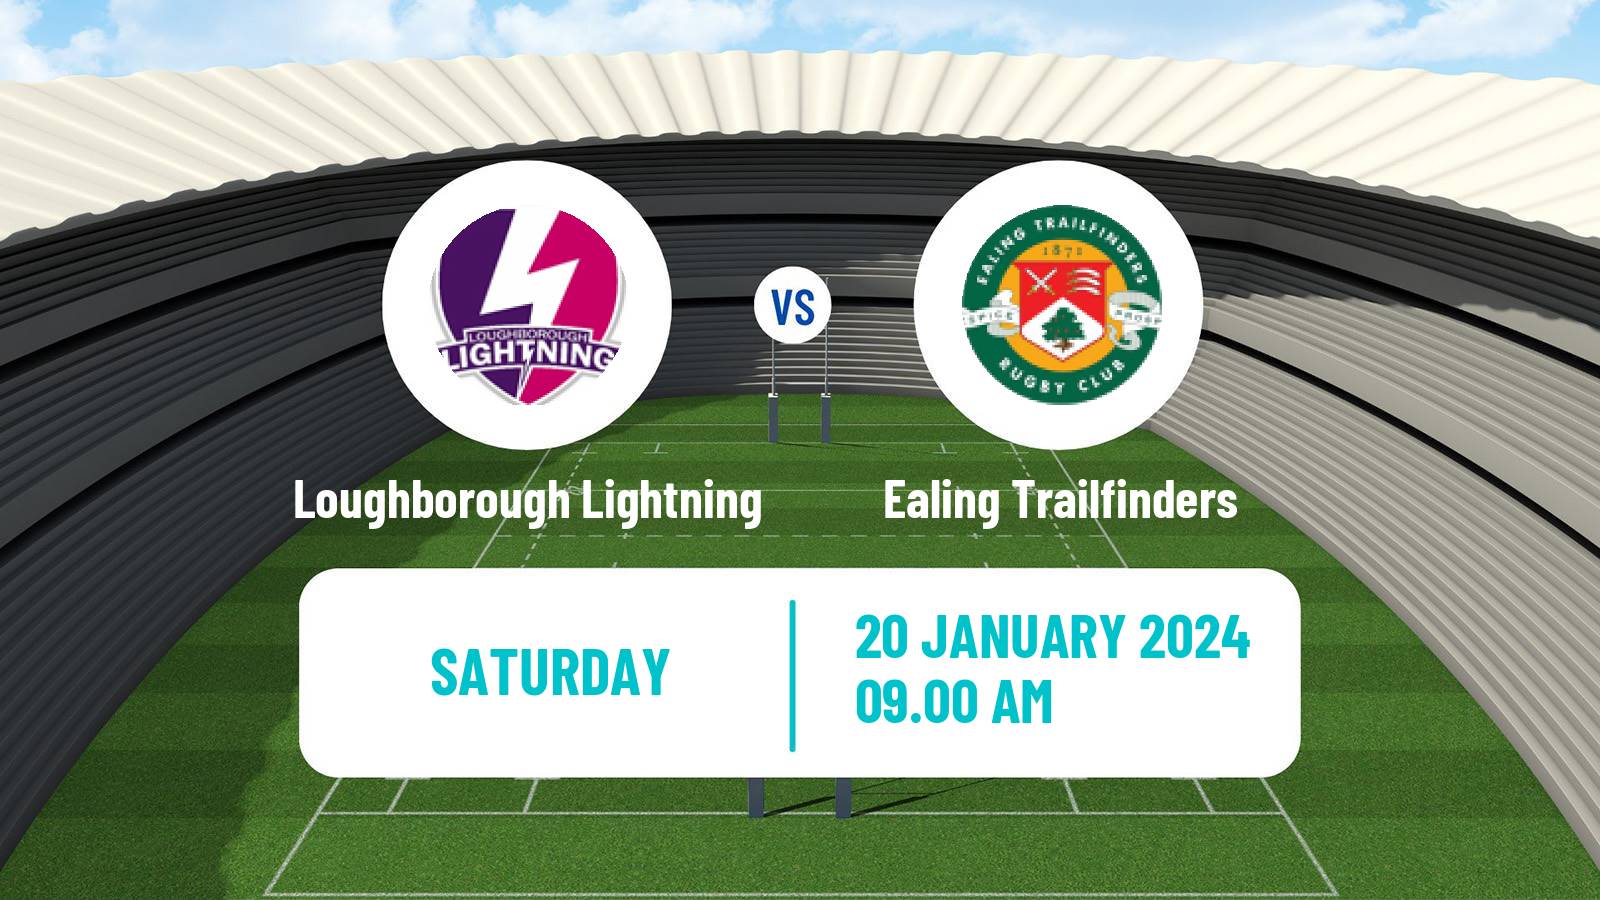 Rugby union English Premier 15s Rugby Women Loughborough Lightning - Ealing Trailfinders